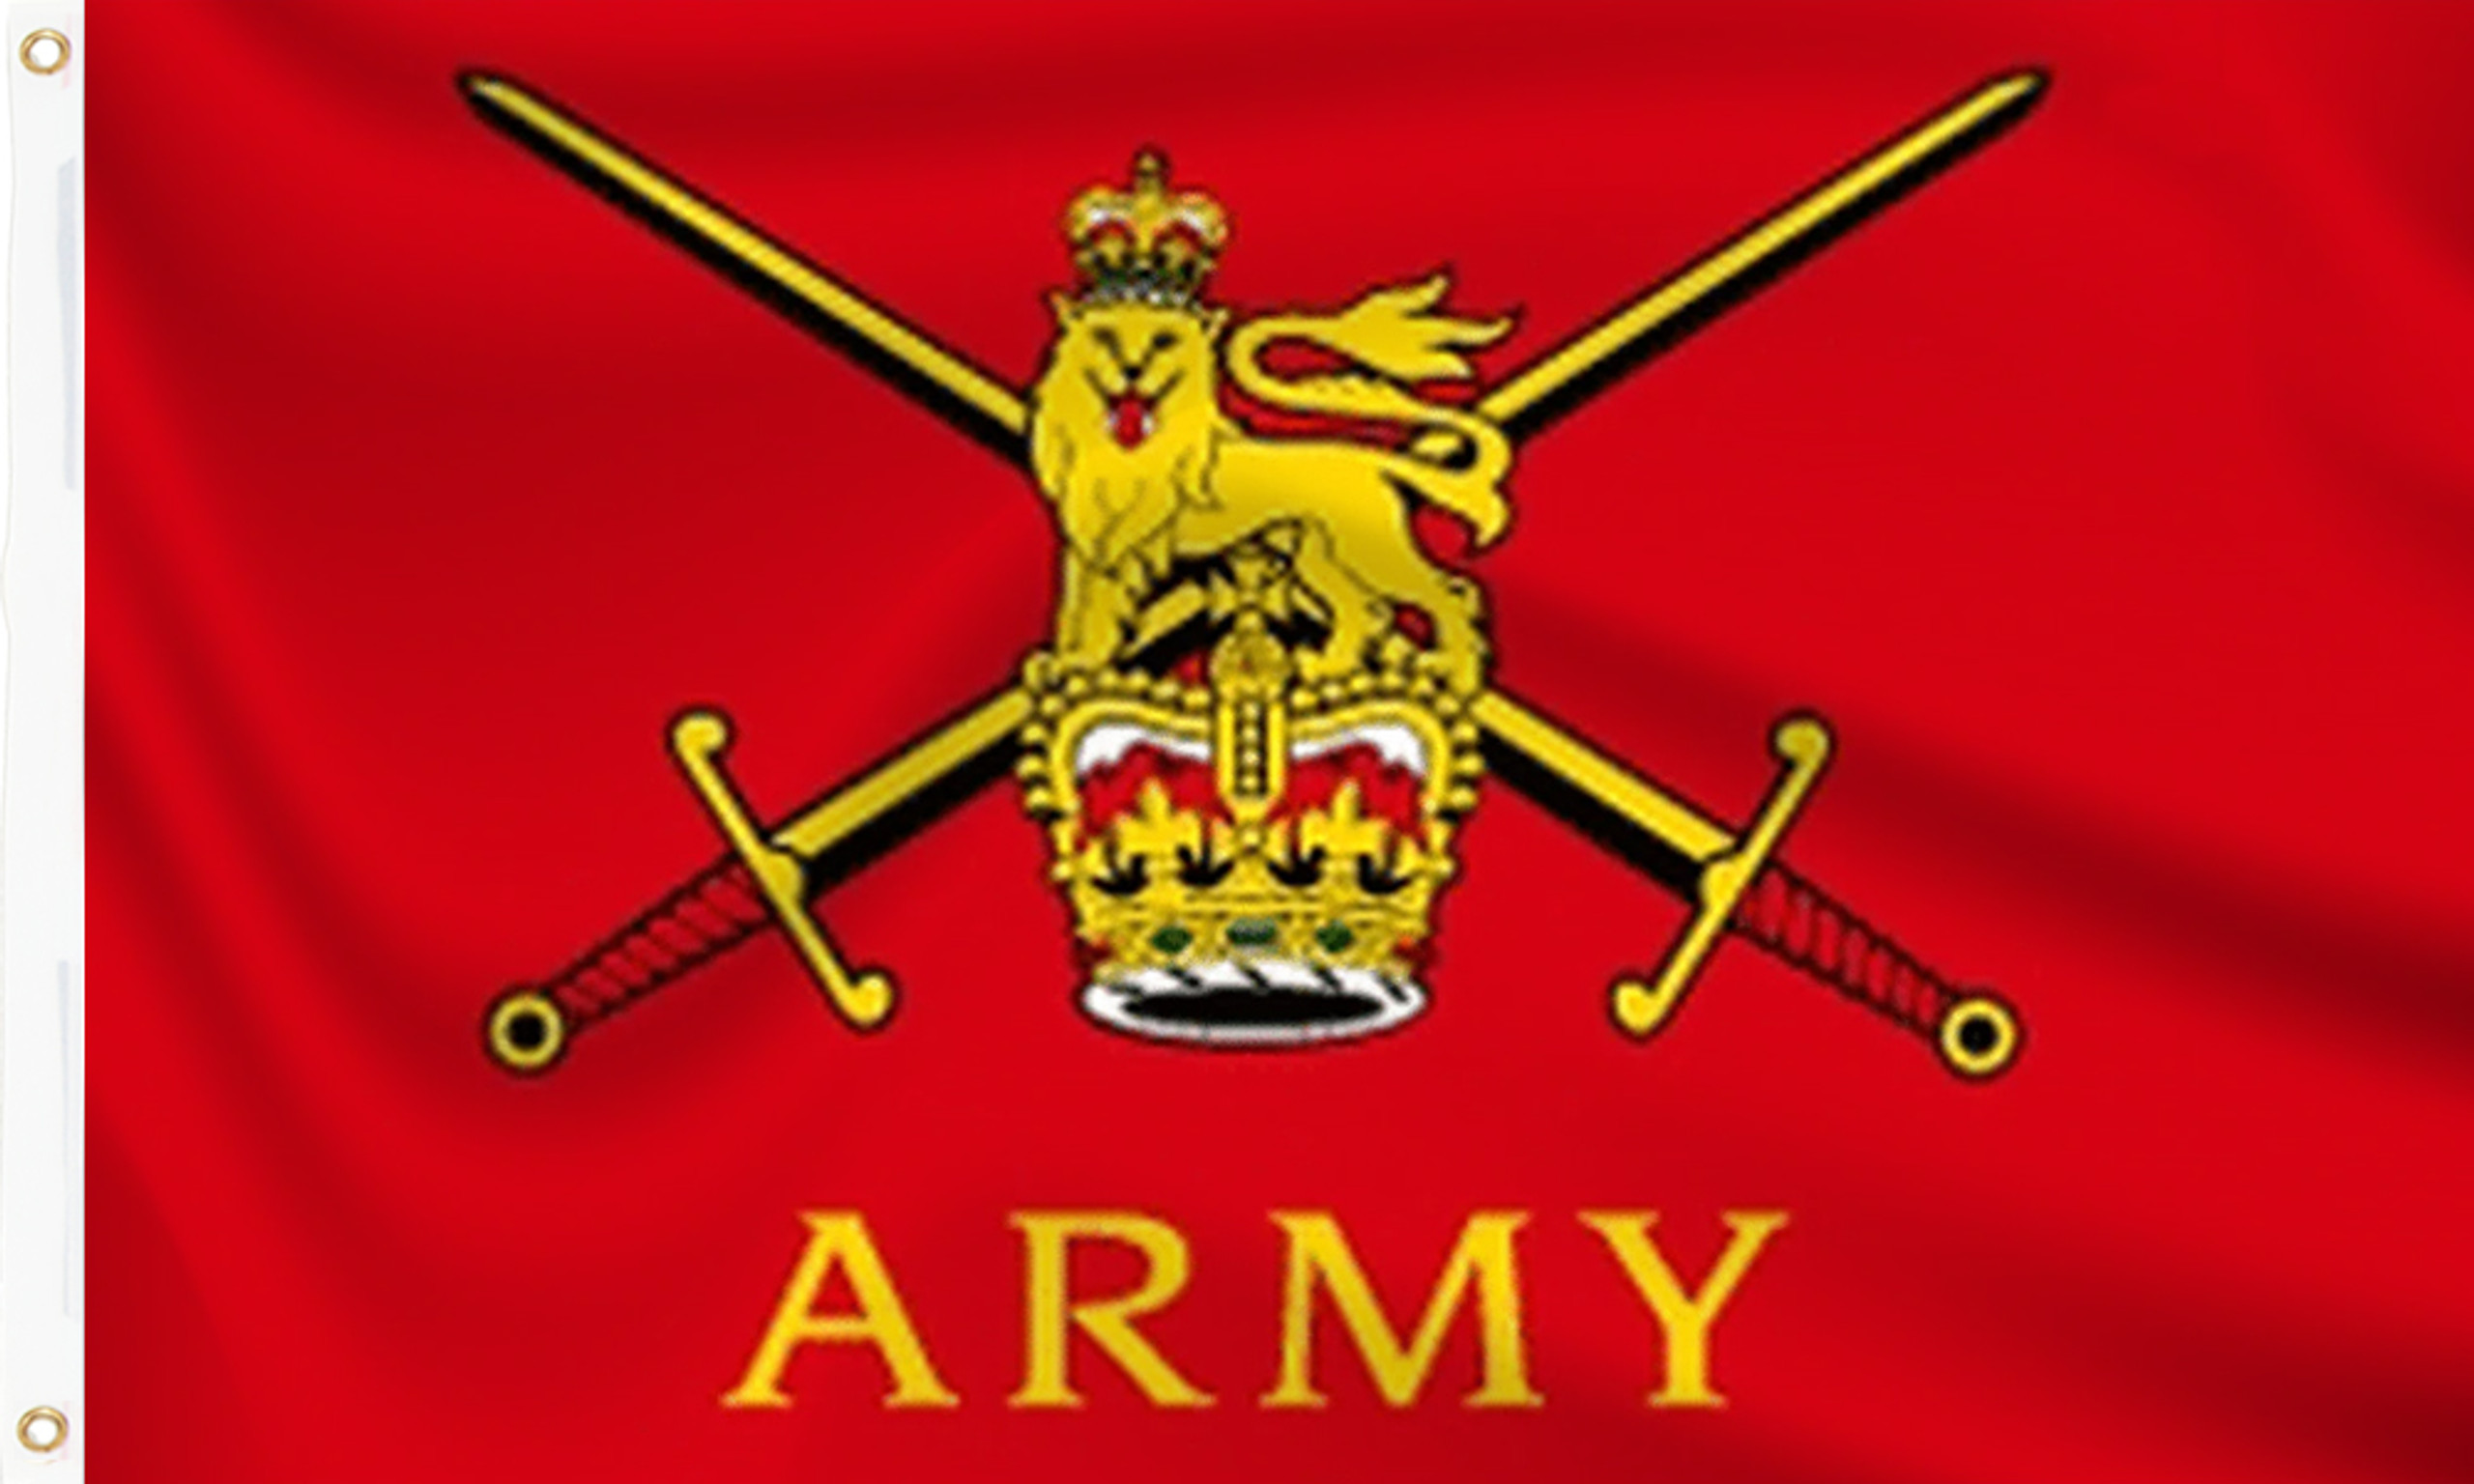 Buy British Army Flags | British Army Flags for sale at Flag and ...